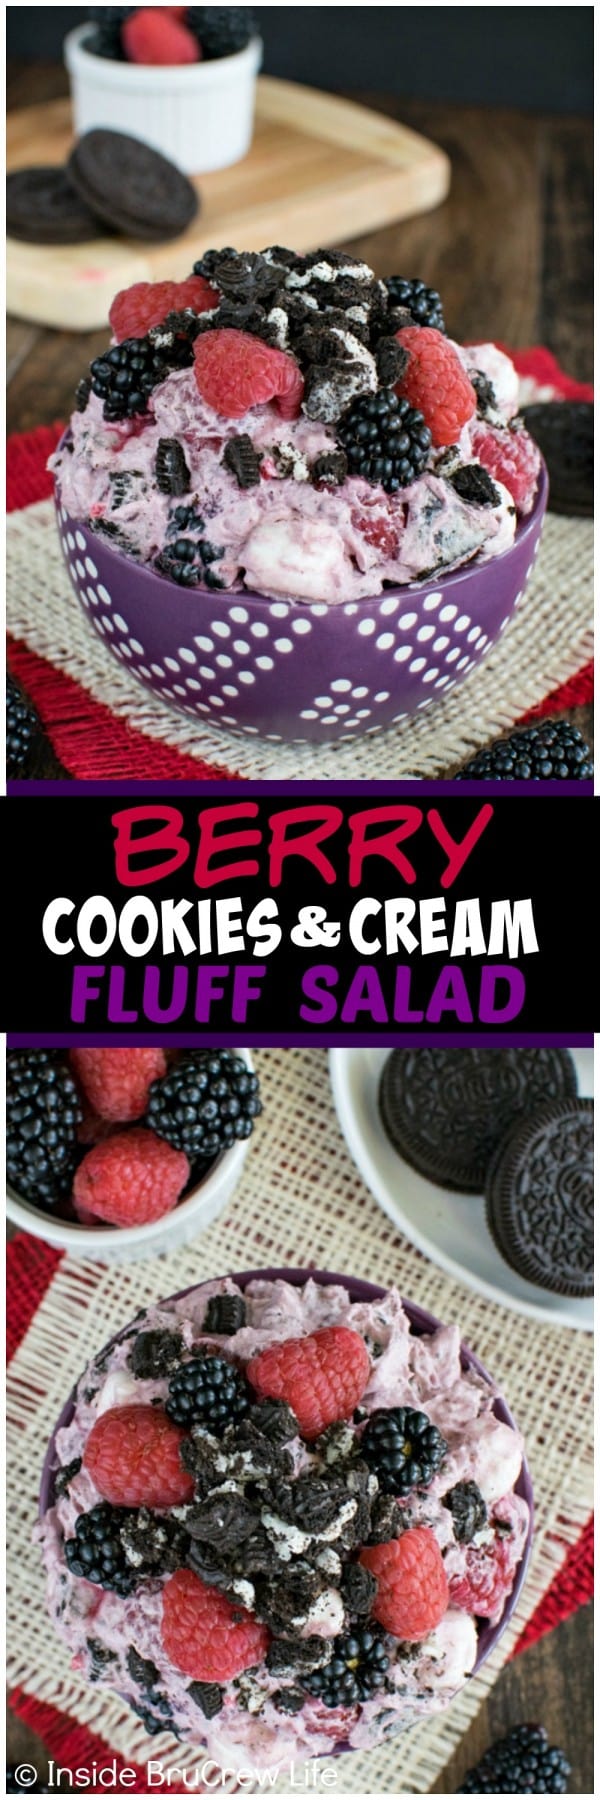 Berry Cookies and Cream Fluff Salad - berries and cookie chunks add a fun flair to this easy dessert salad. Great no bake recipe for picnics!